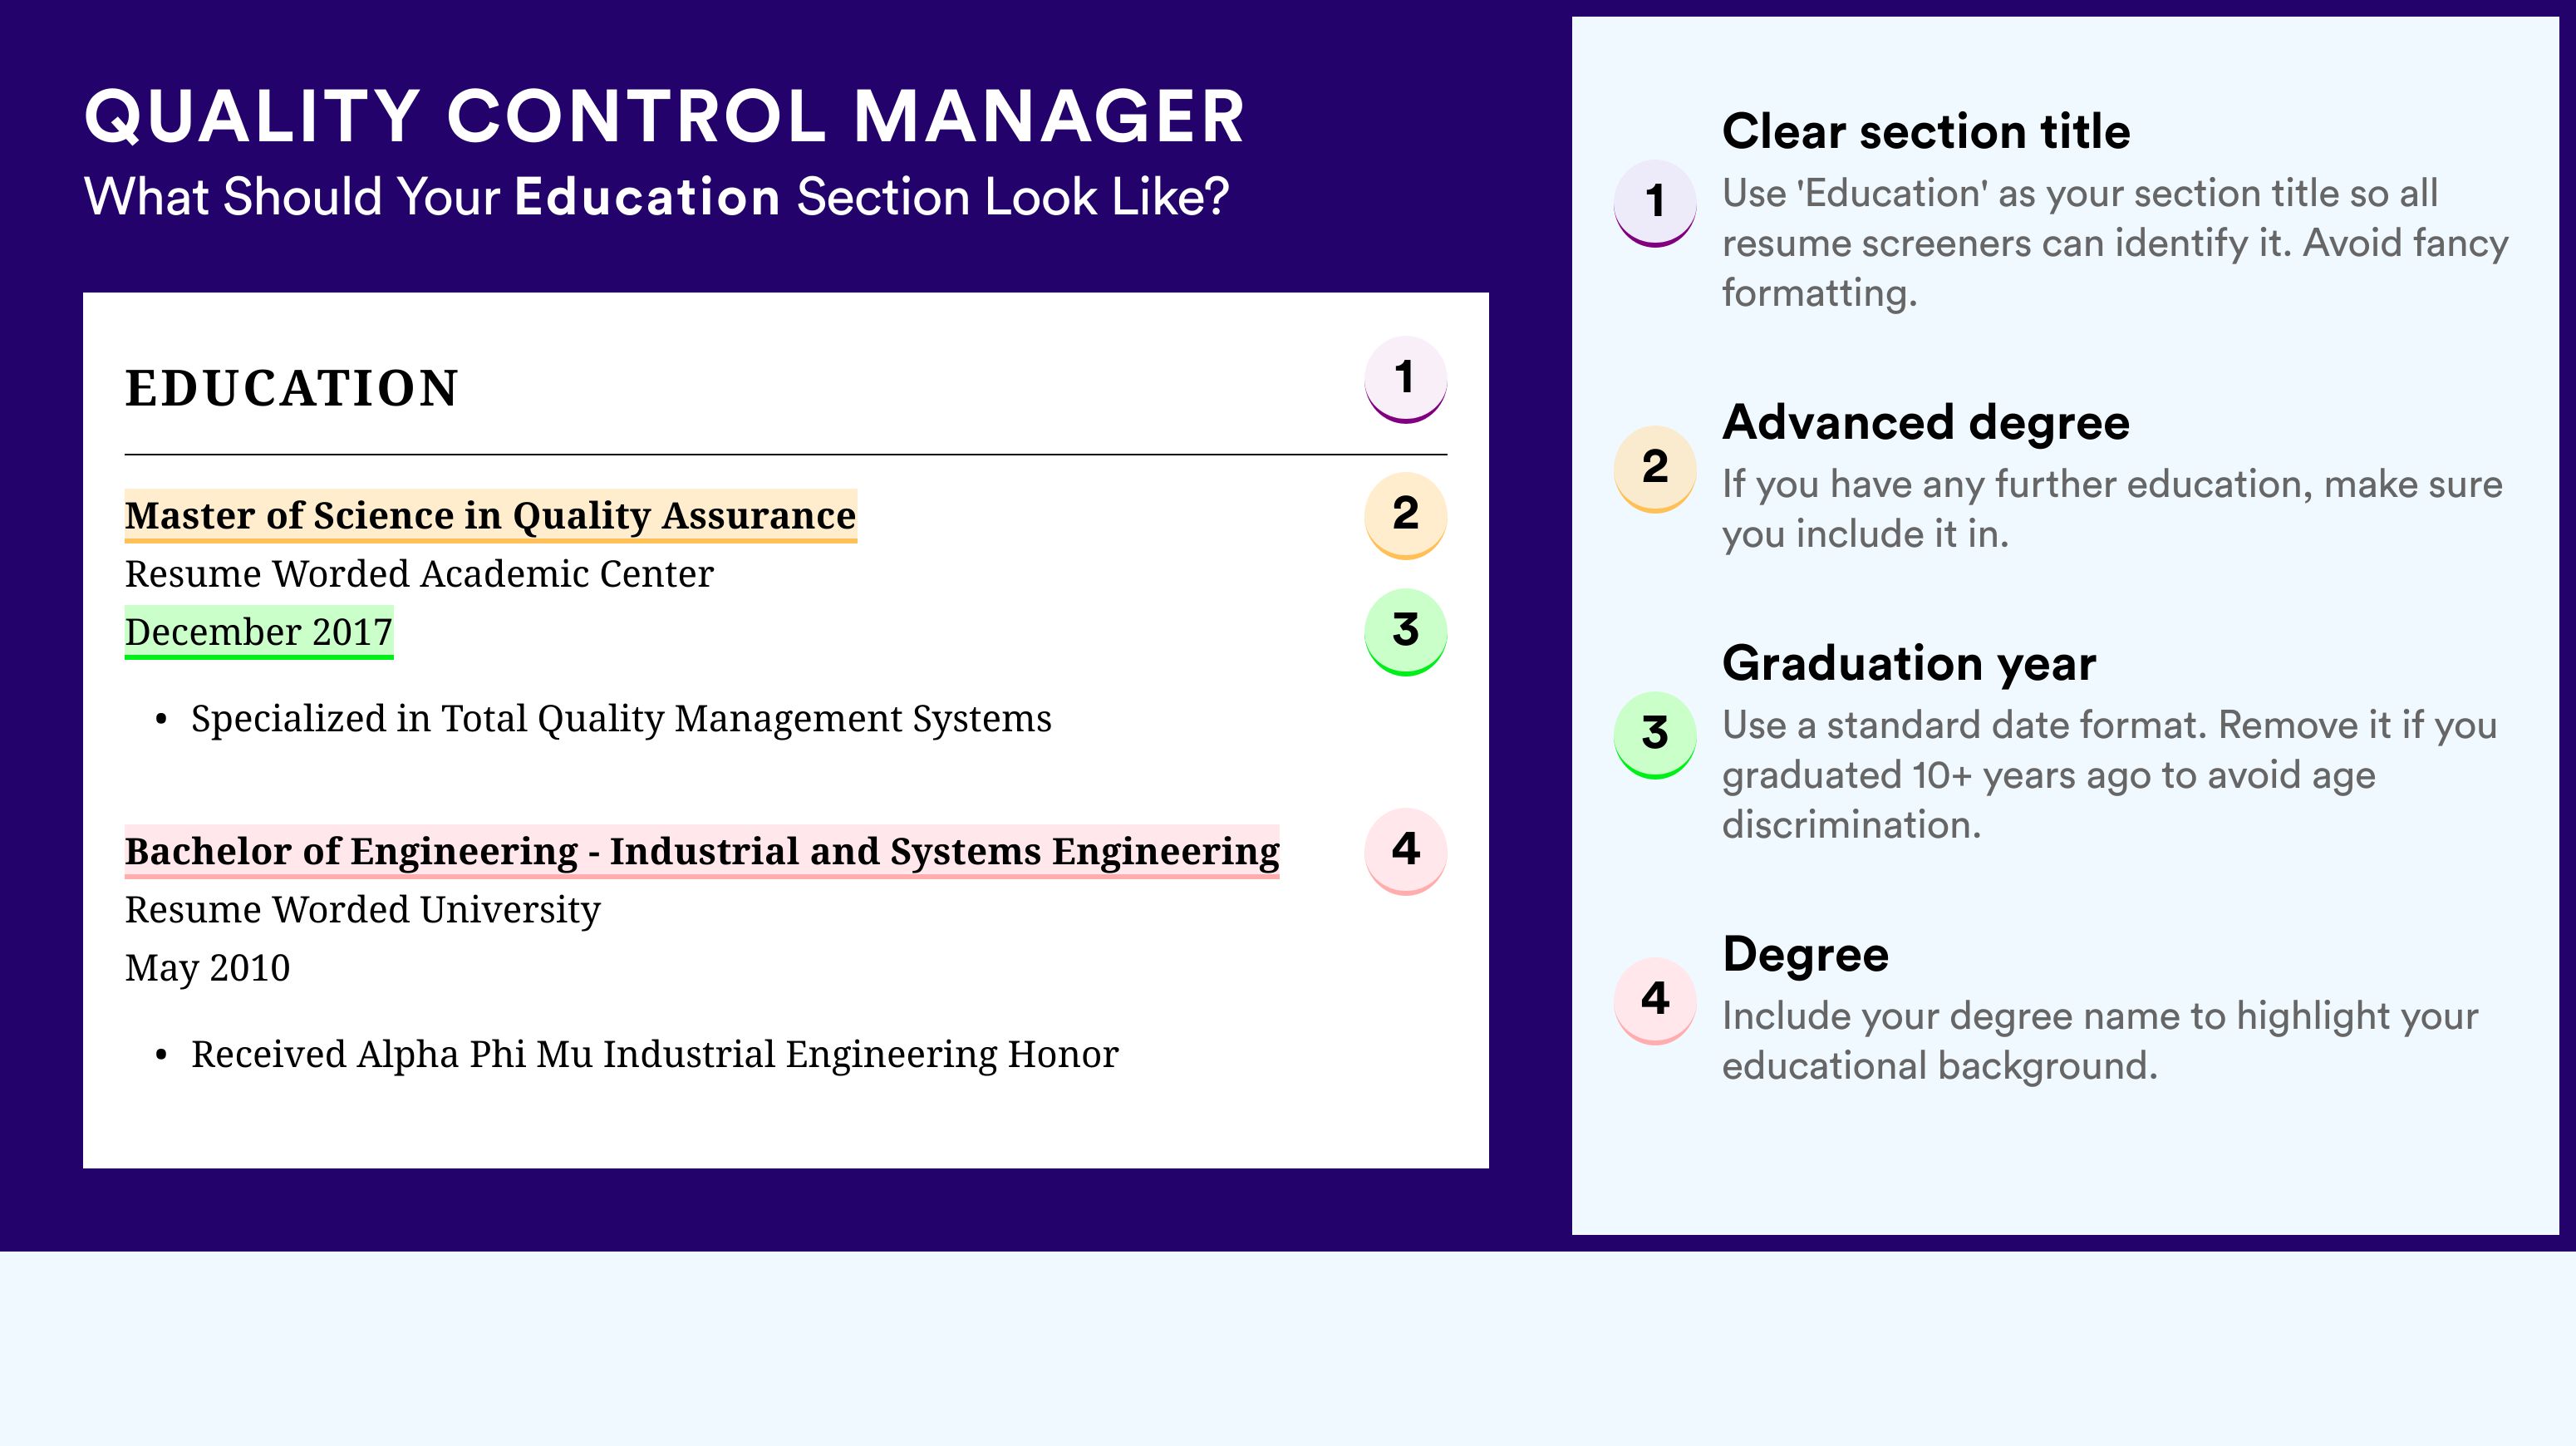 How To Write An Education Section - Quality Control Manager Roles